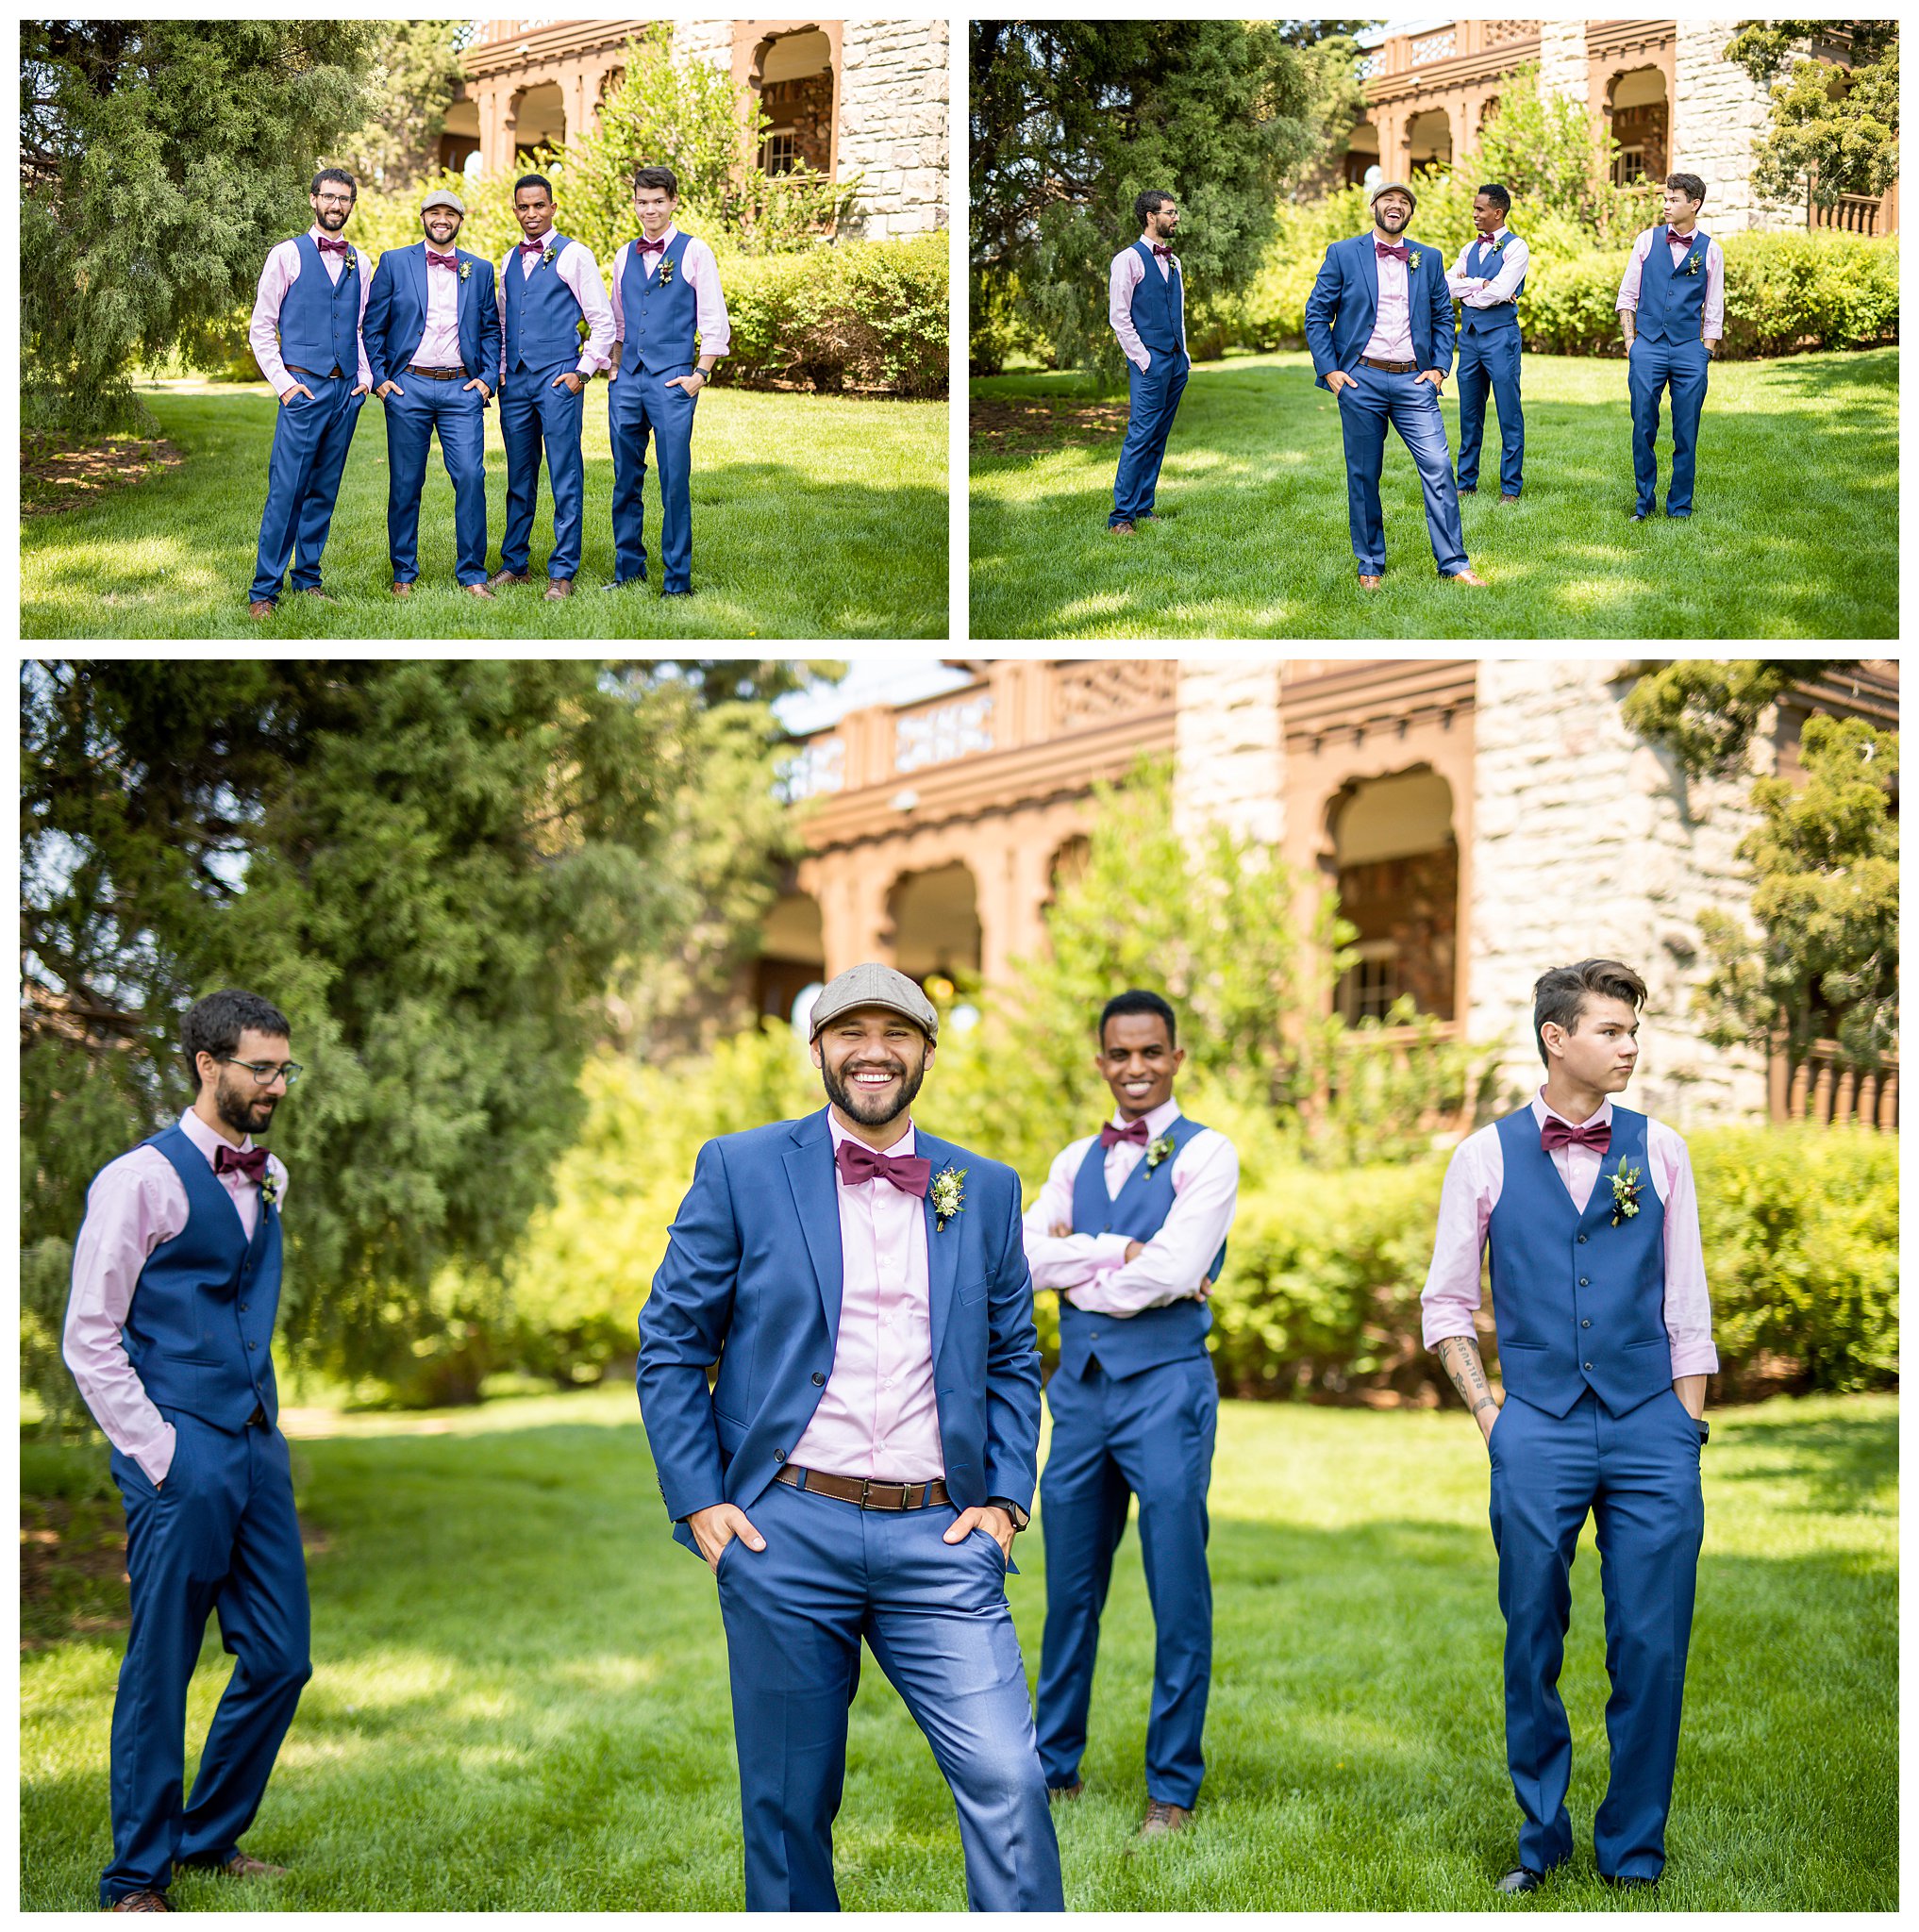 A groom poses with his groomsmen